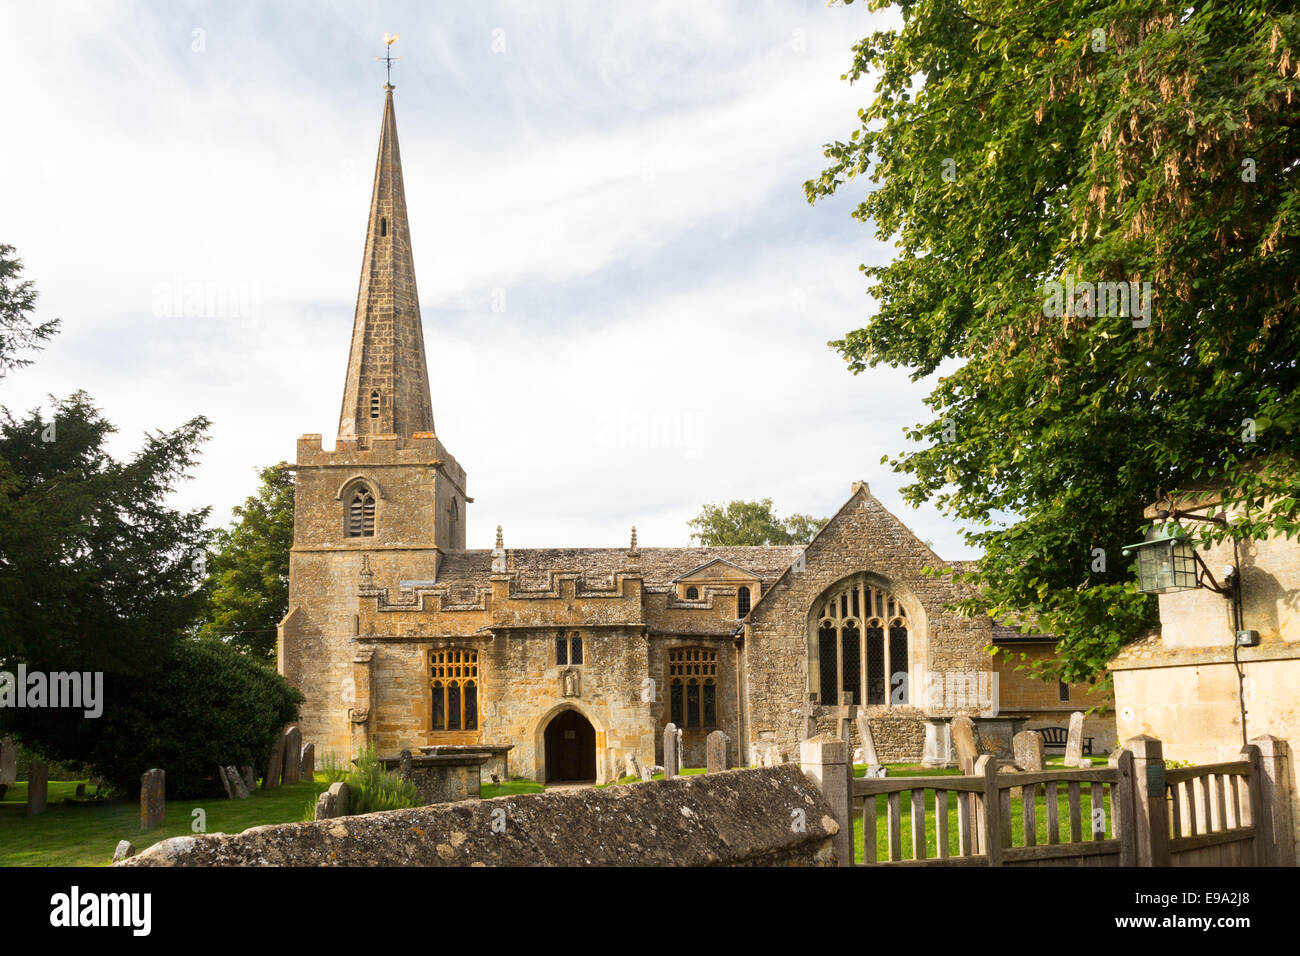 Parish Church of Stanton in Cotswolds Stock Photo